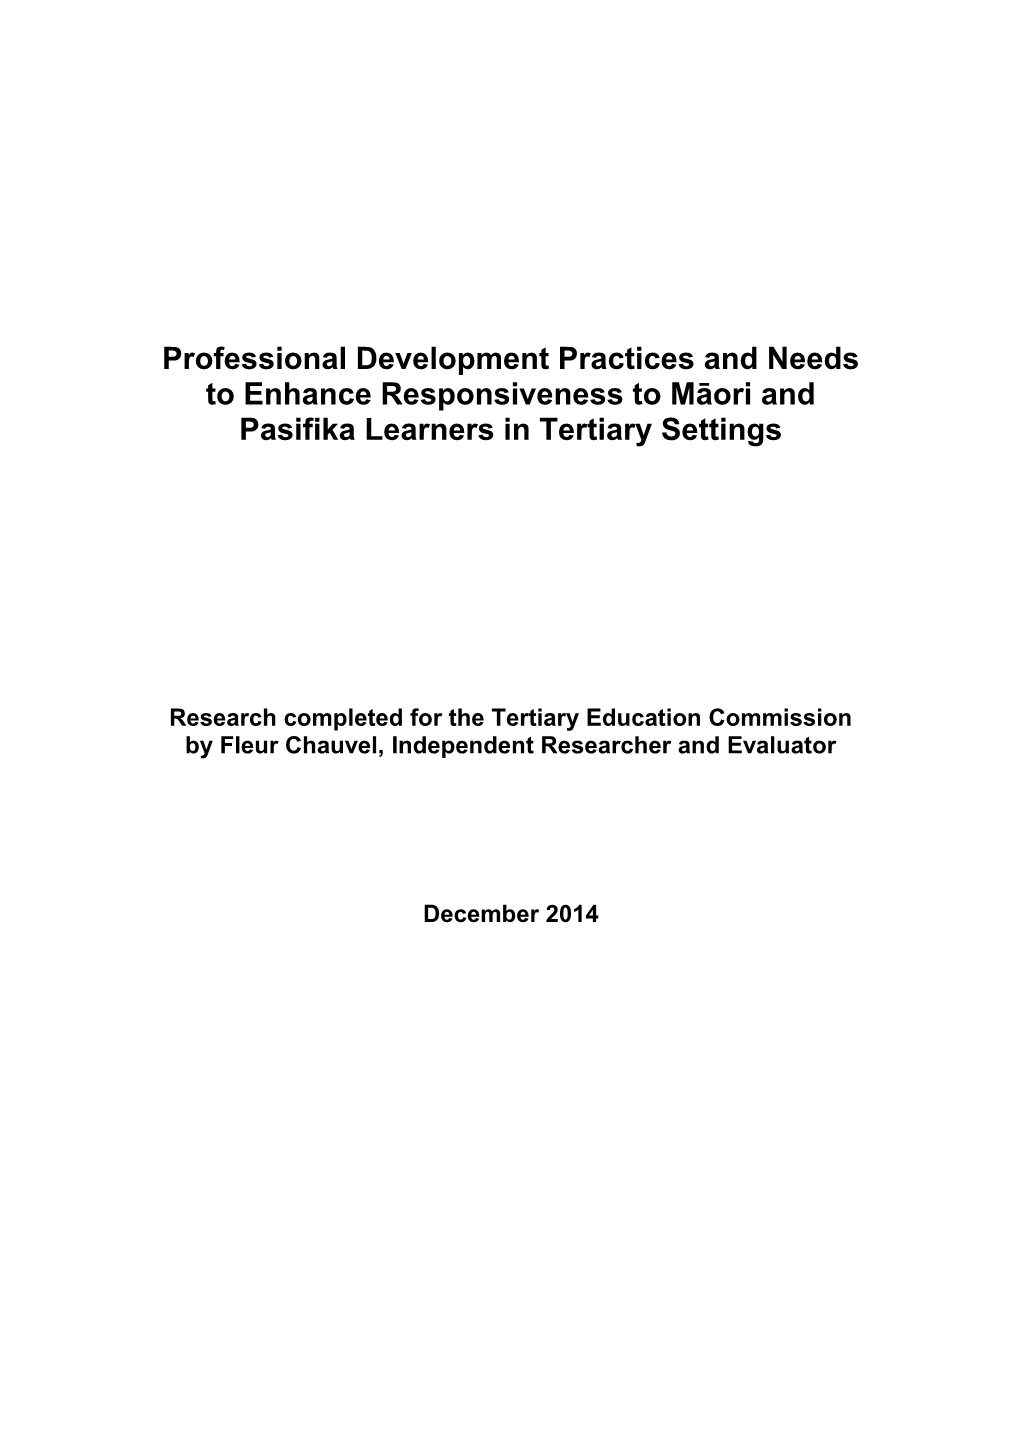 Professional Development Practices and Needs to Enhance Responsiveness to Maori and Pasifika